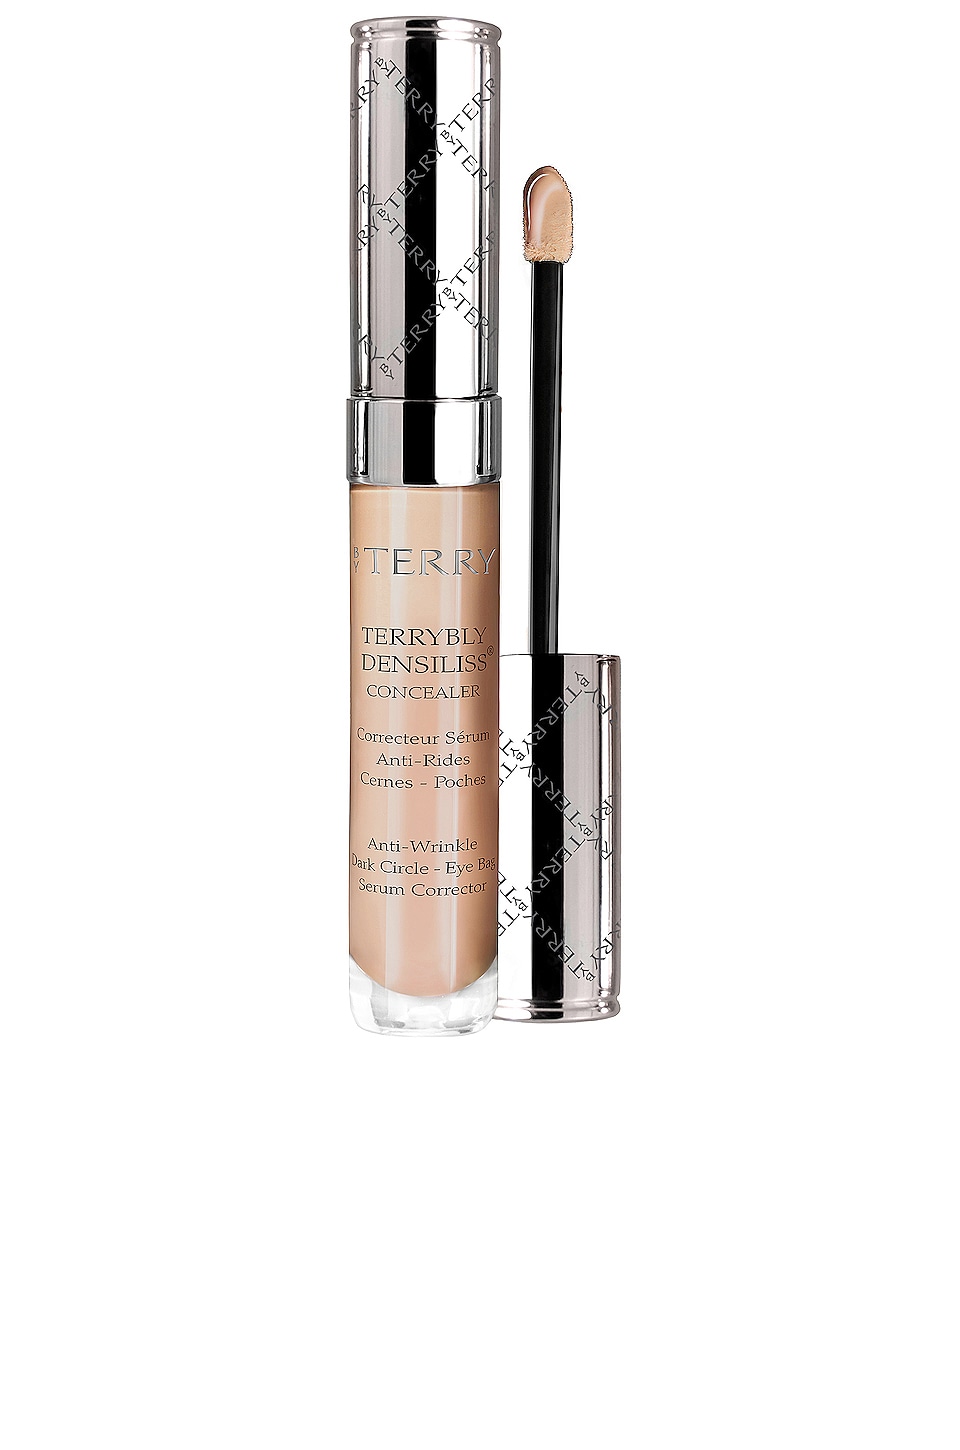 Консилер By Terry Terrybly Densiliss, цвет Desert Beige by terry консилер terrybly densiliss concealer оттенок 4 medium peach